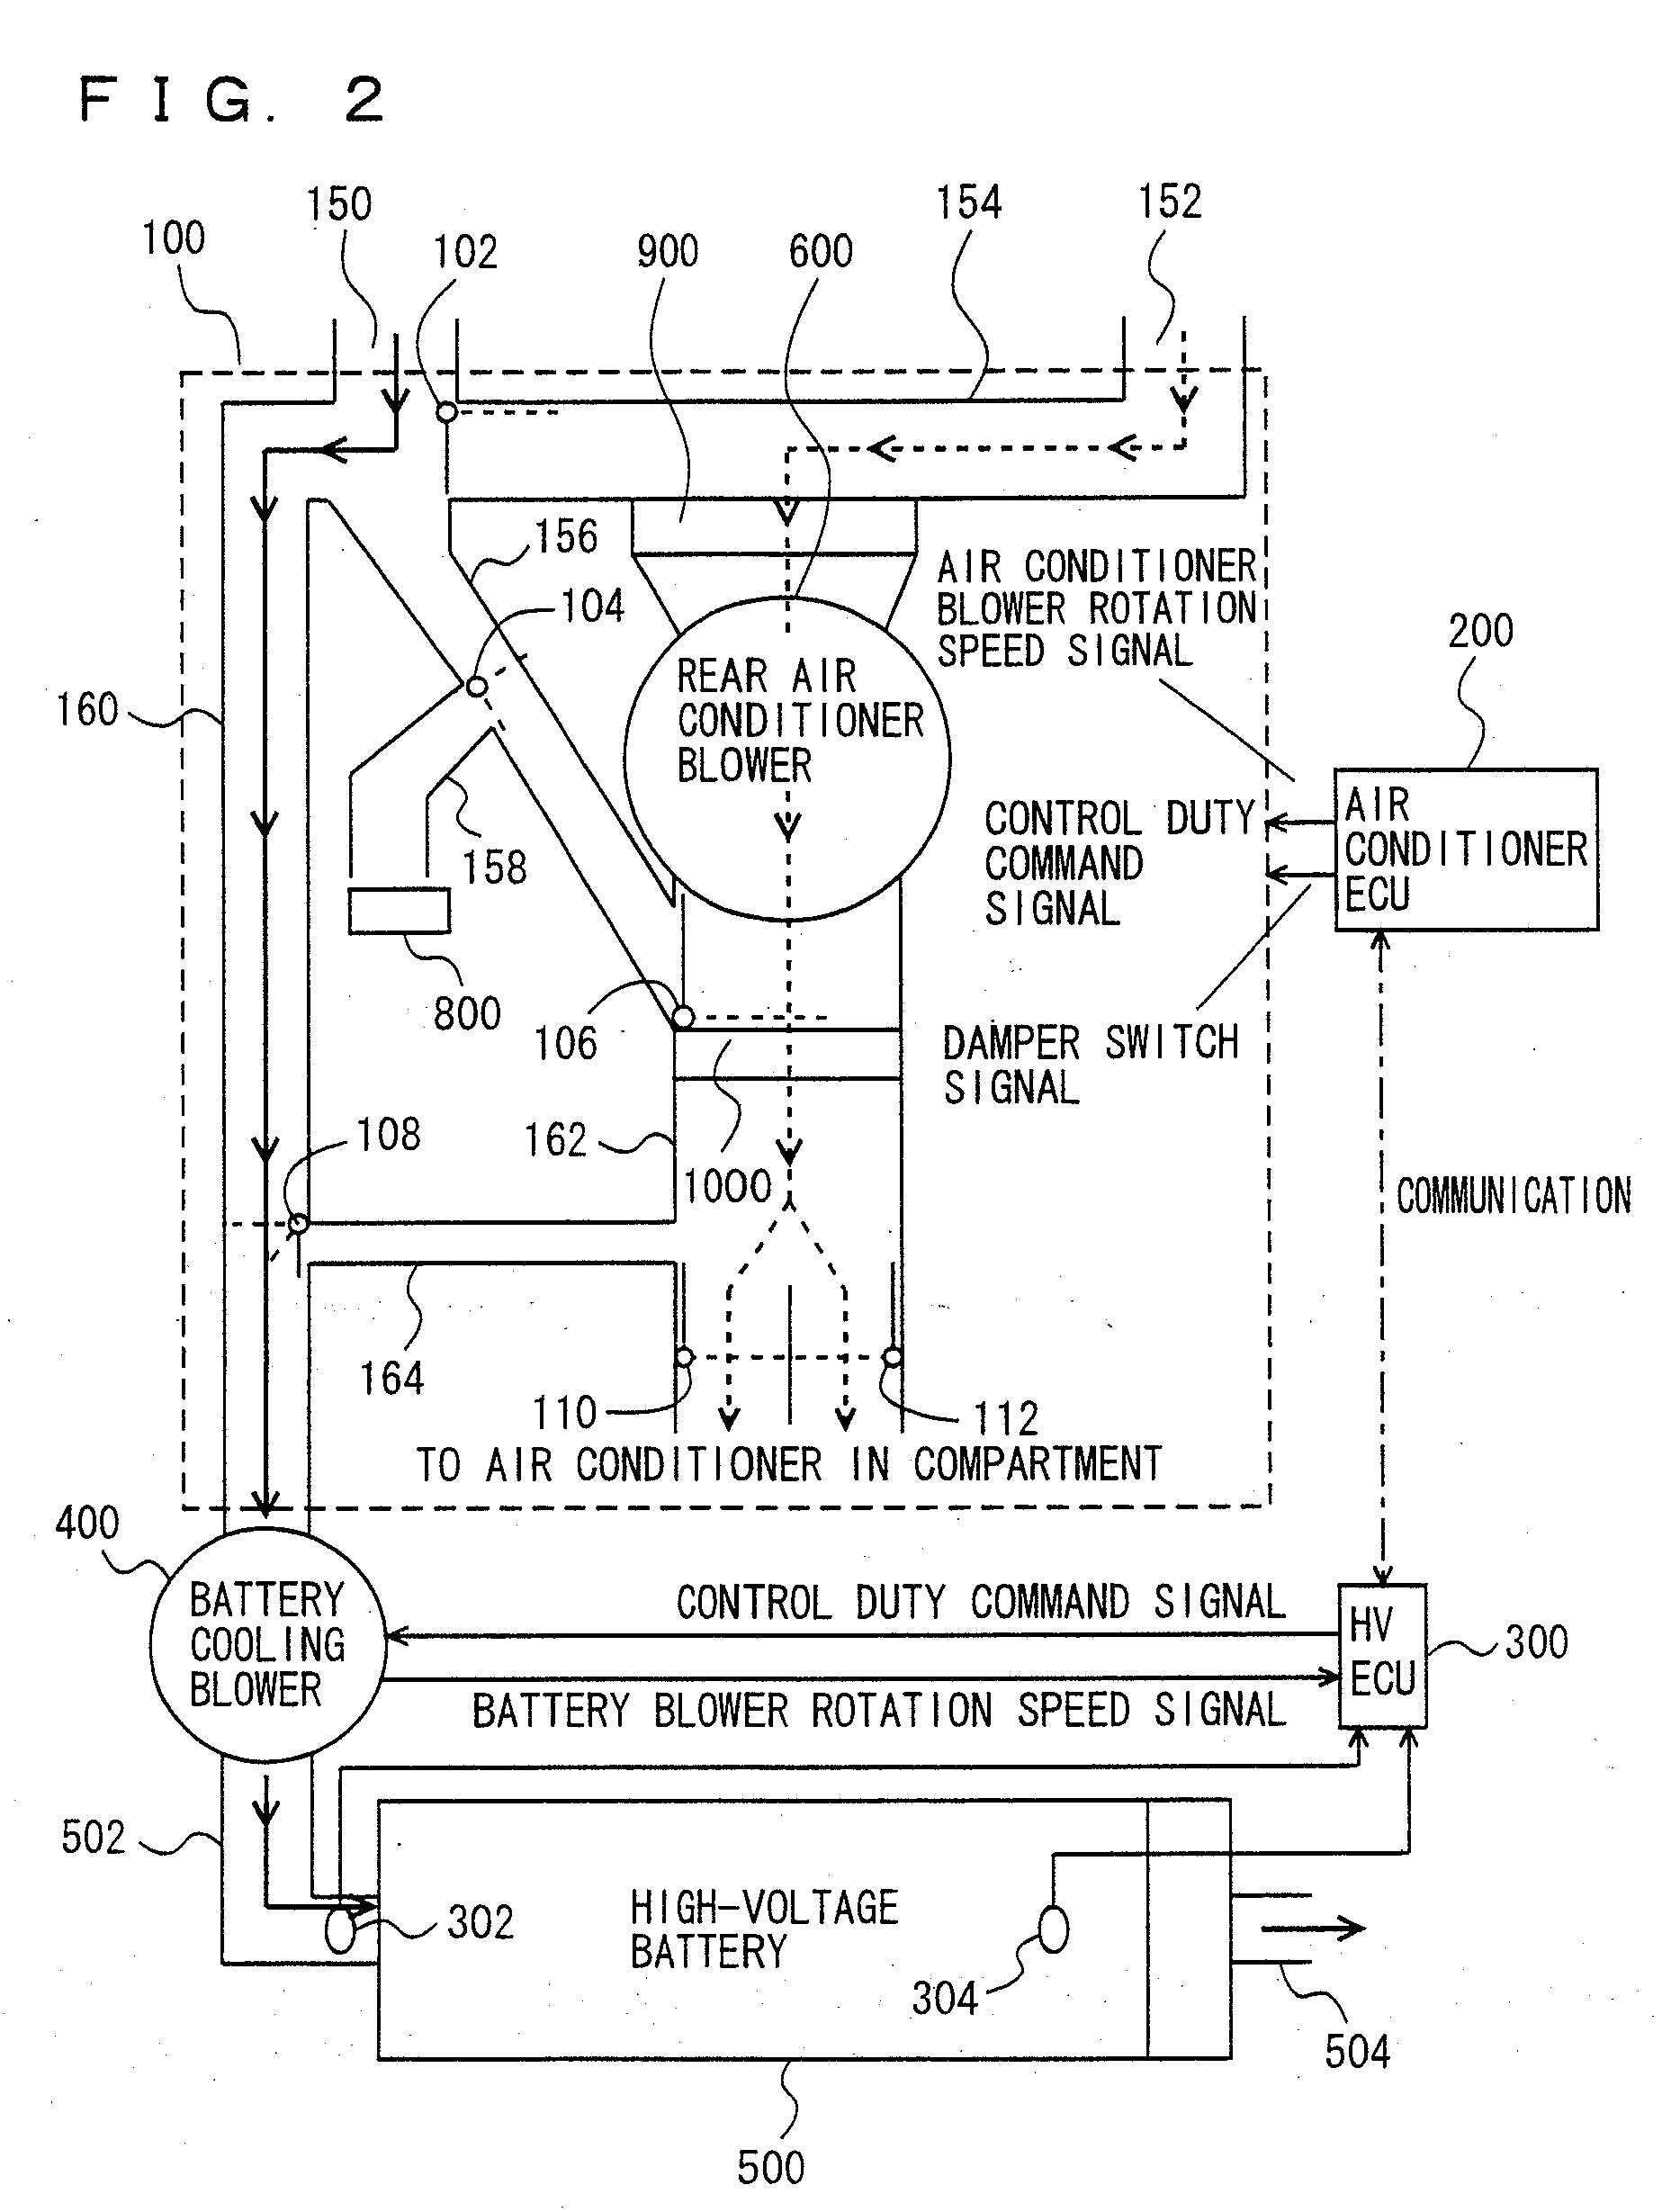 Apparatus and method for cooling electrical equipment